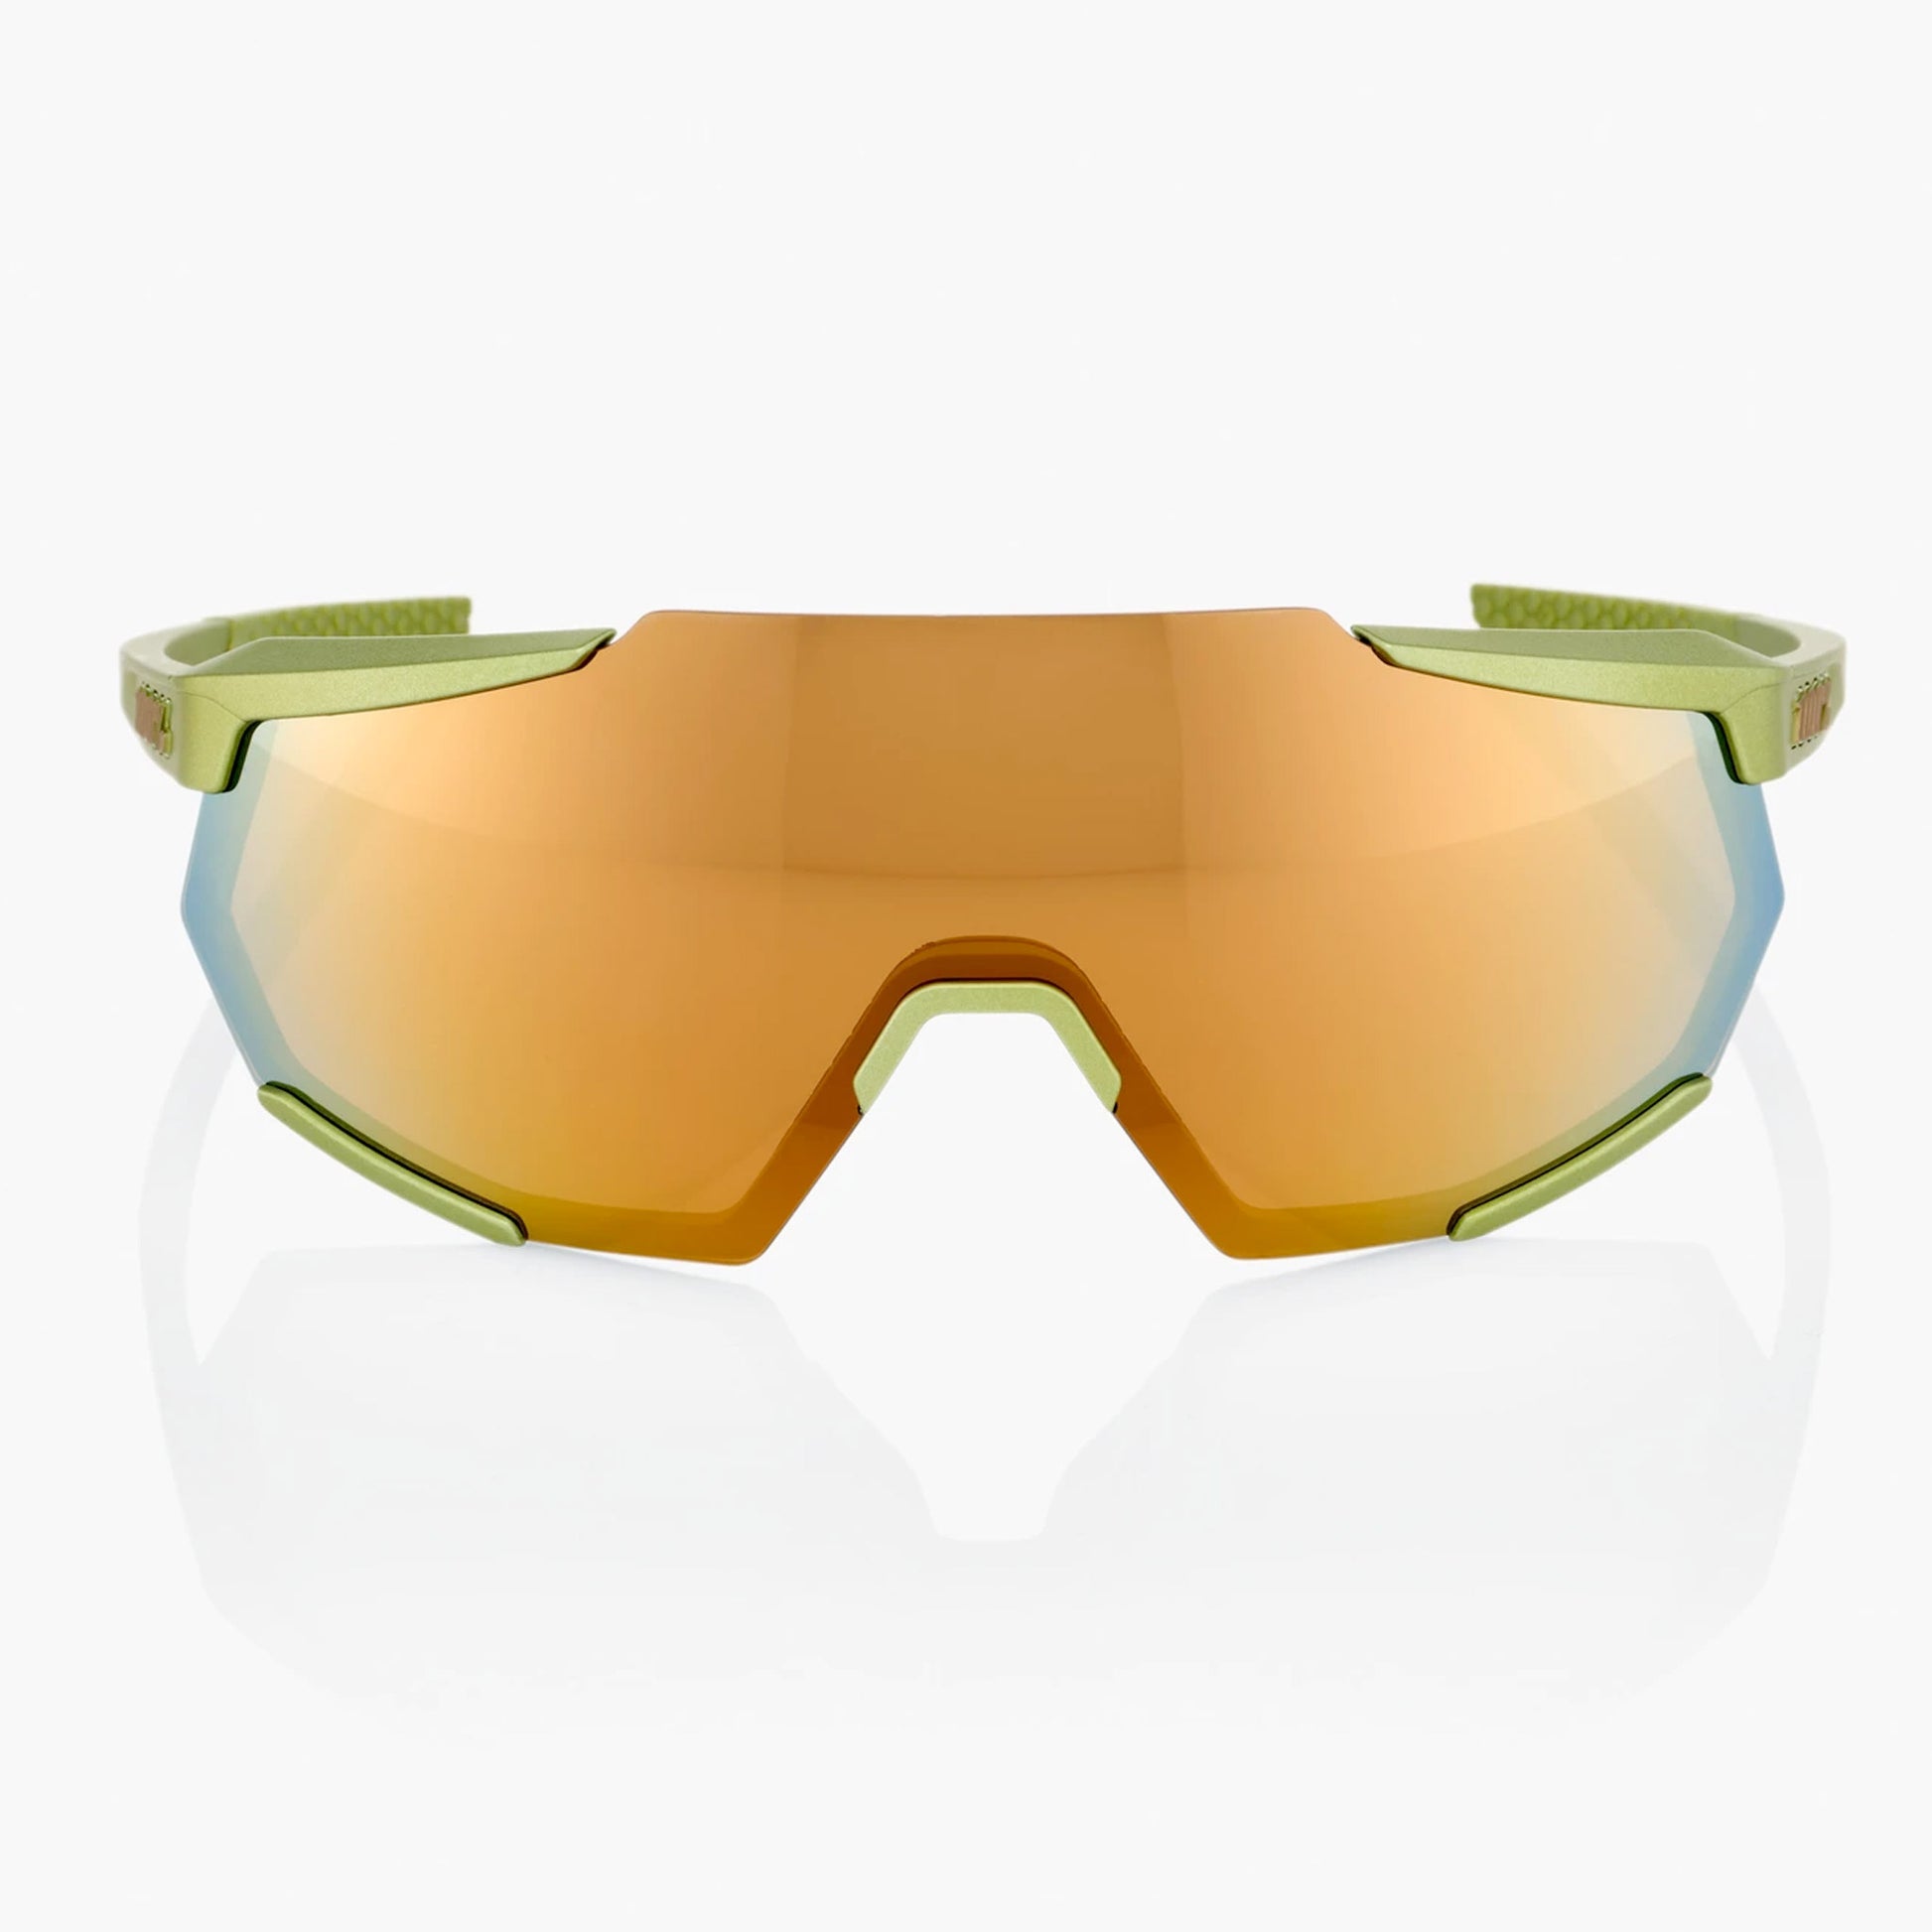 100% Racetrap Cycling Sunglasses, Matt Metalic Viperidae with Bronze Multilayer Mirror Lens +Clear Lens